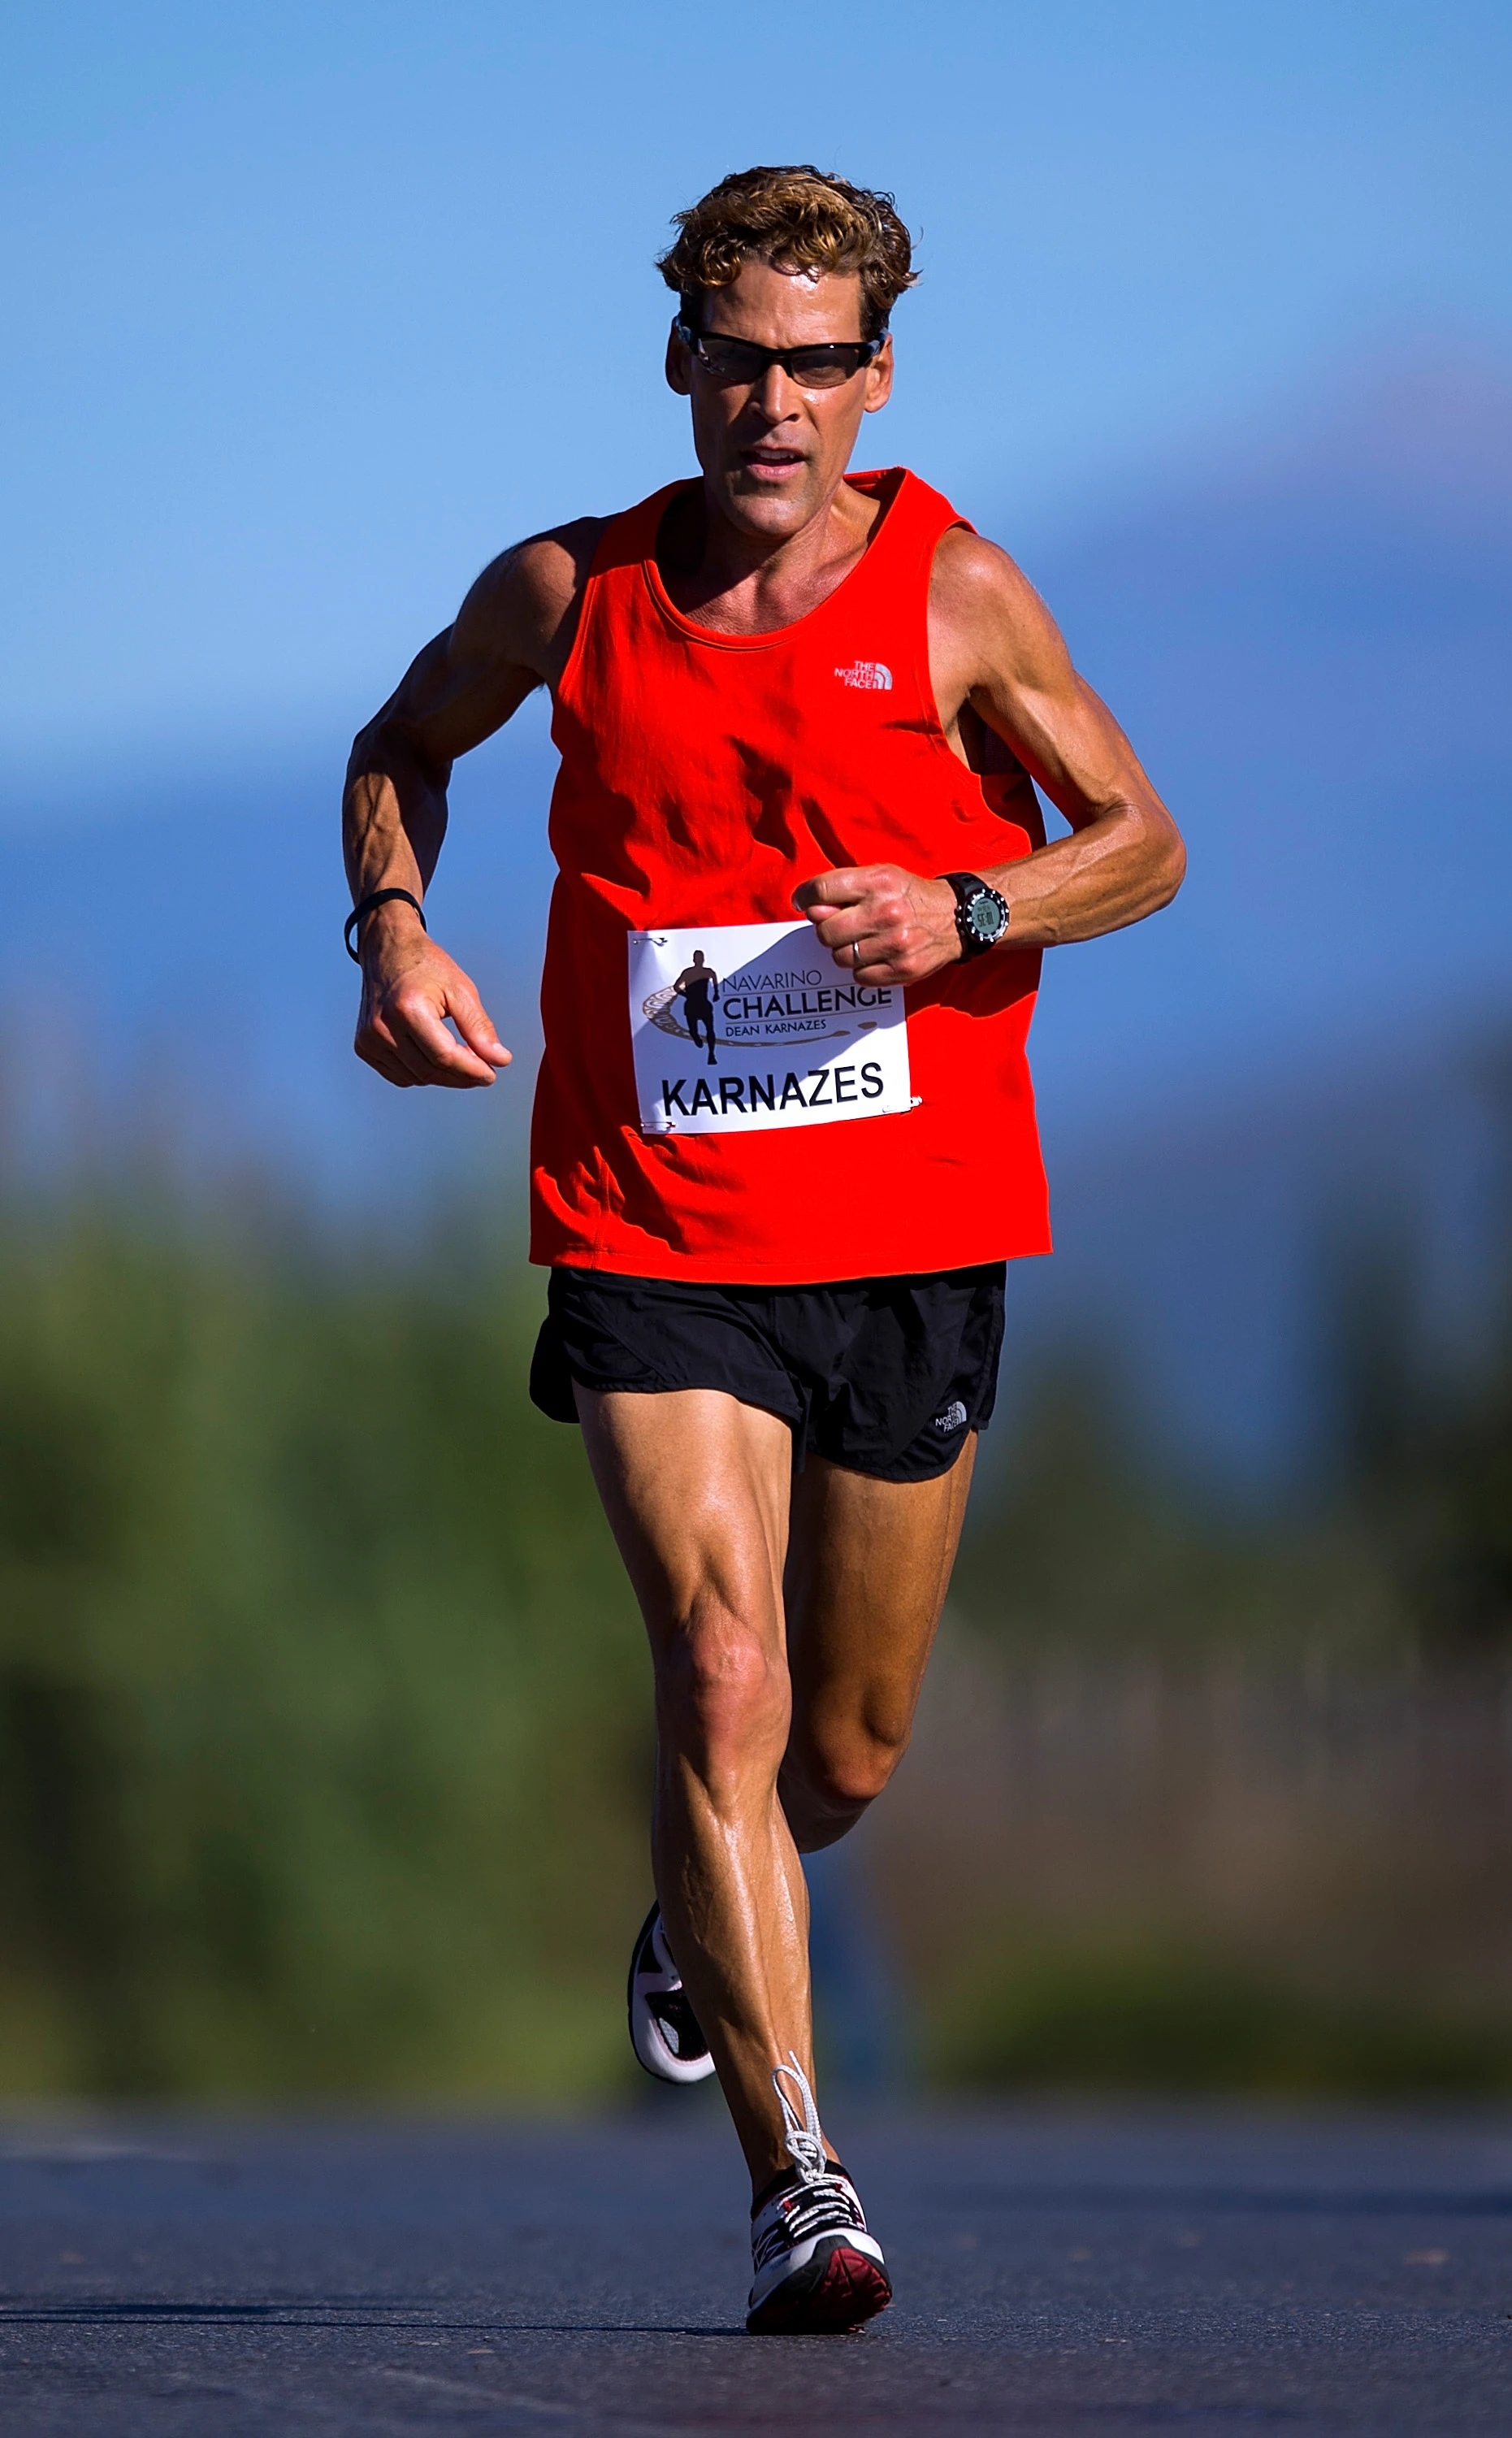 Dean Karnazes wearing red shirt and black shorts while running on road